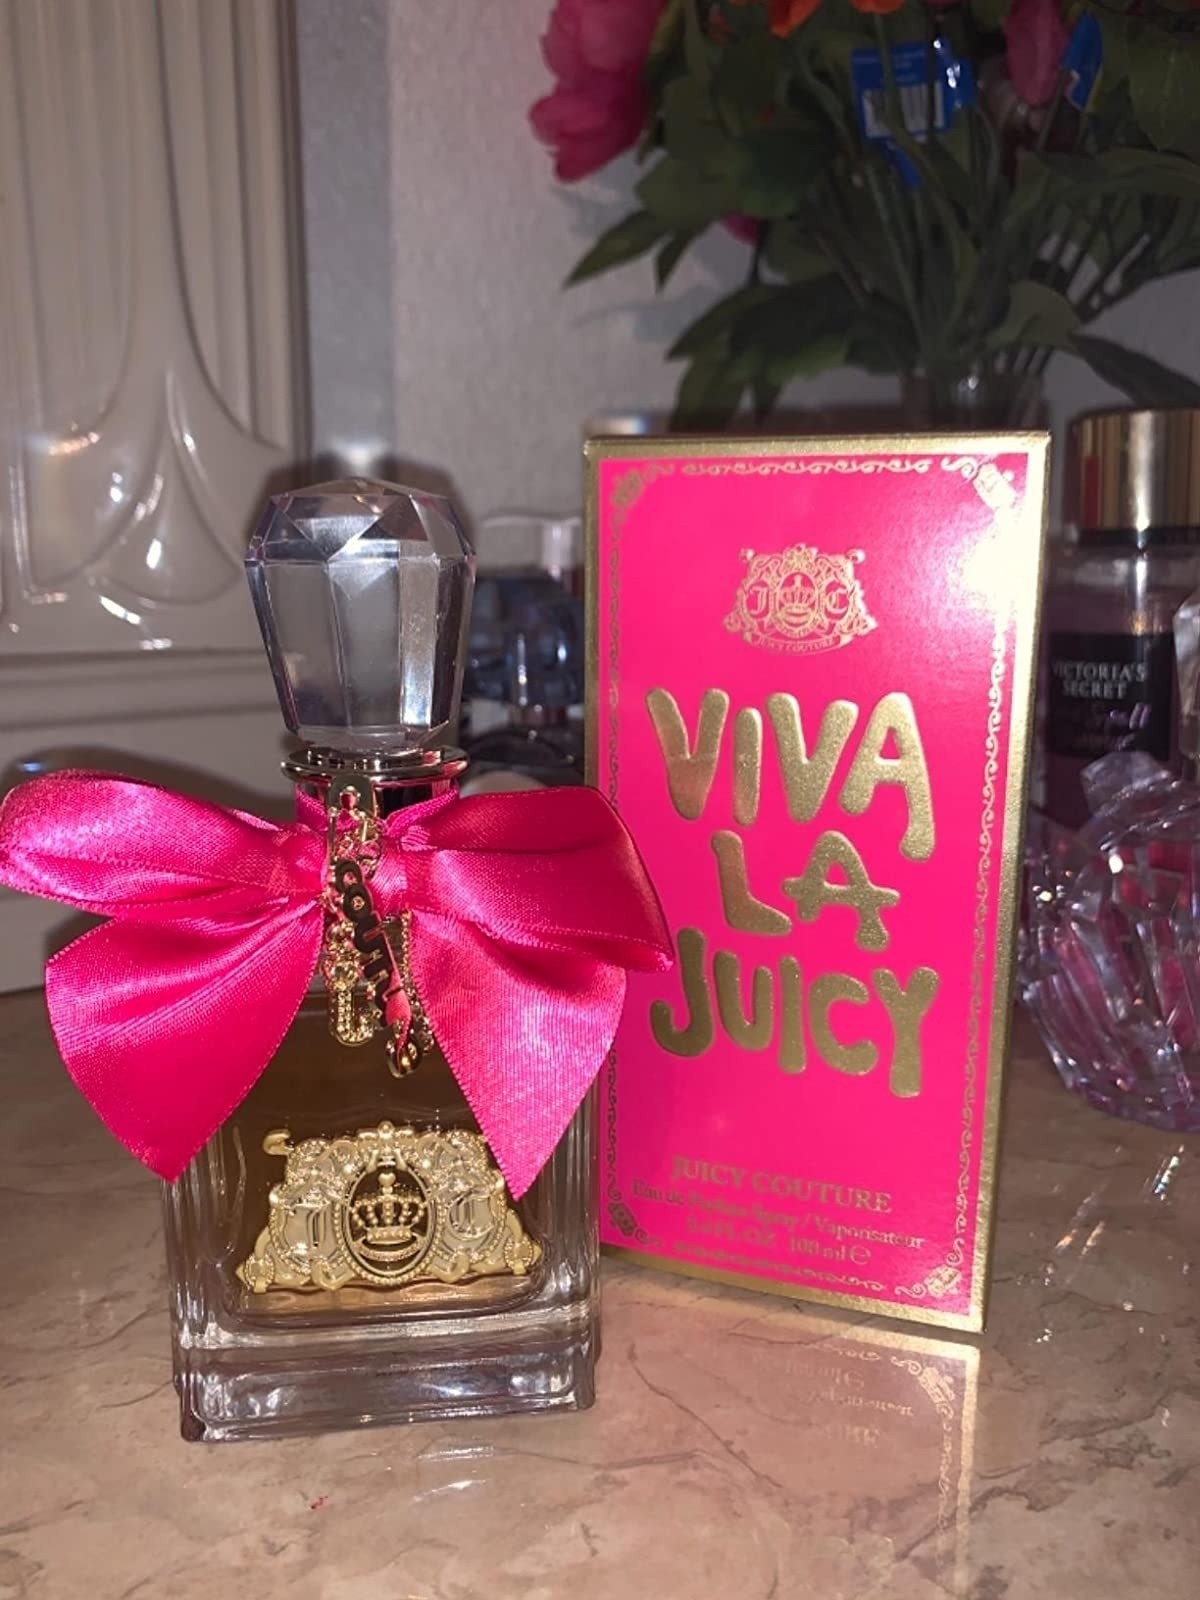 bottle of the Viva La Juicy perfume with pink bow